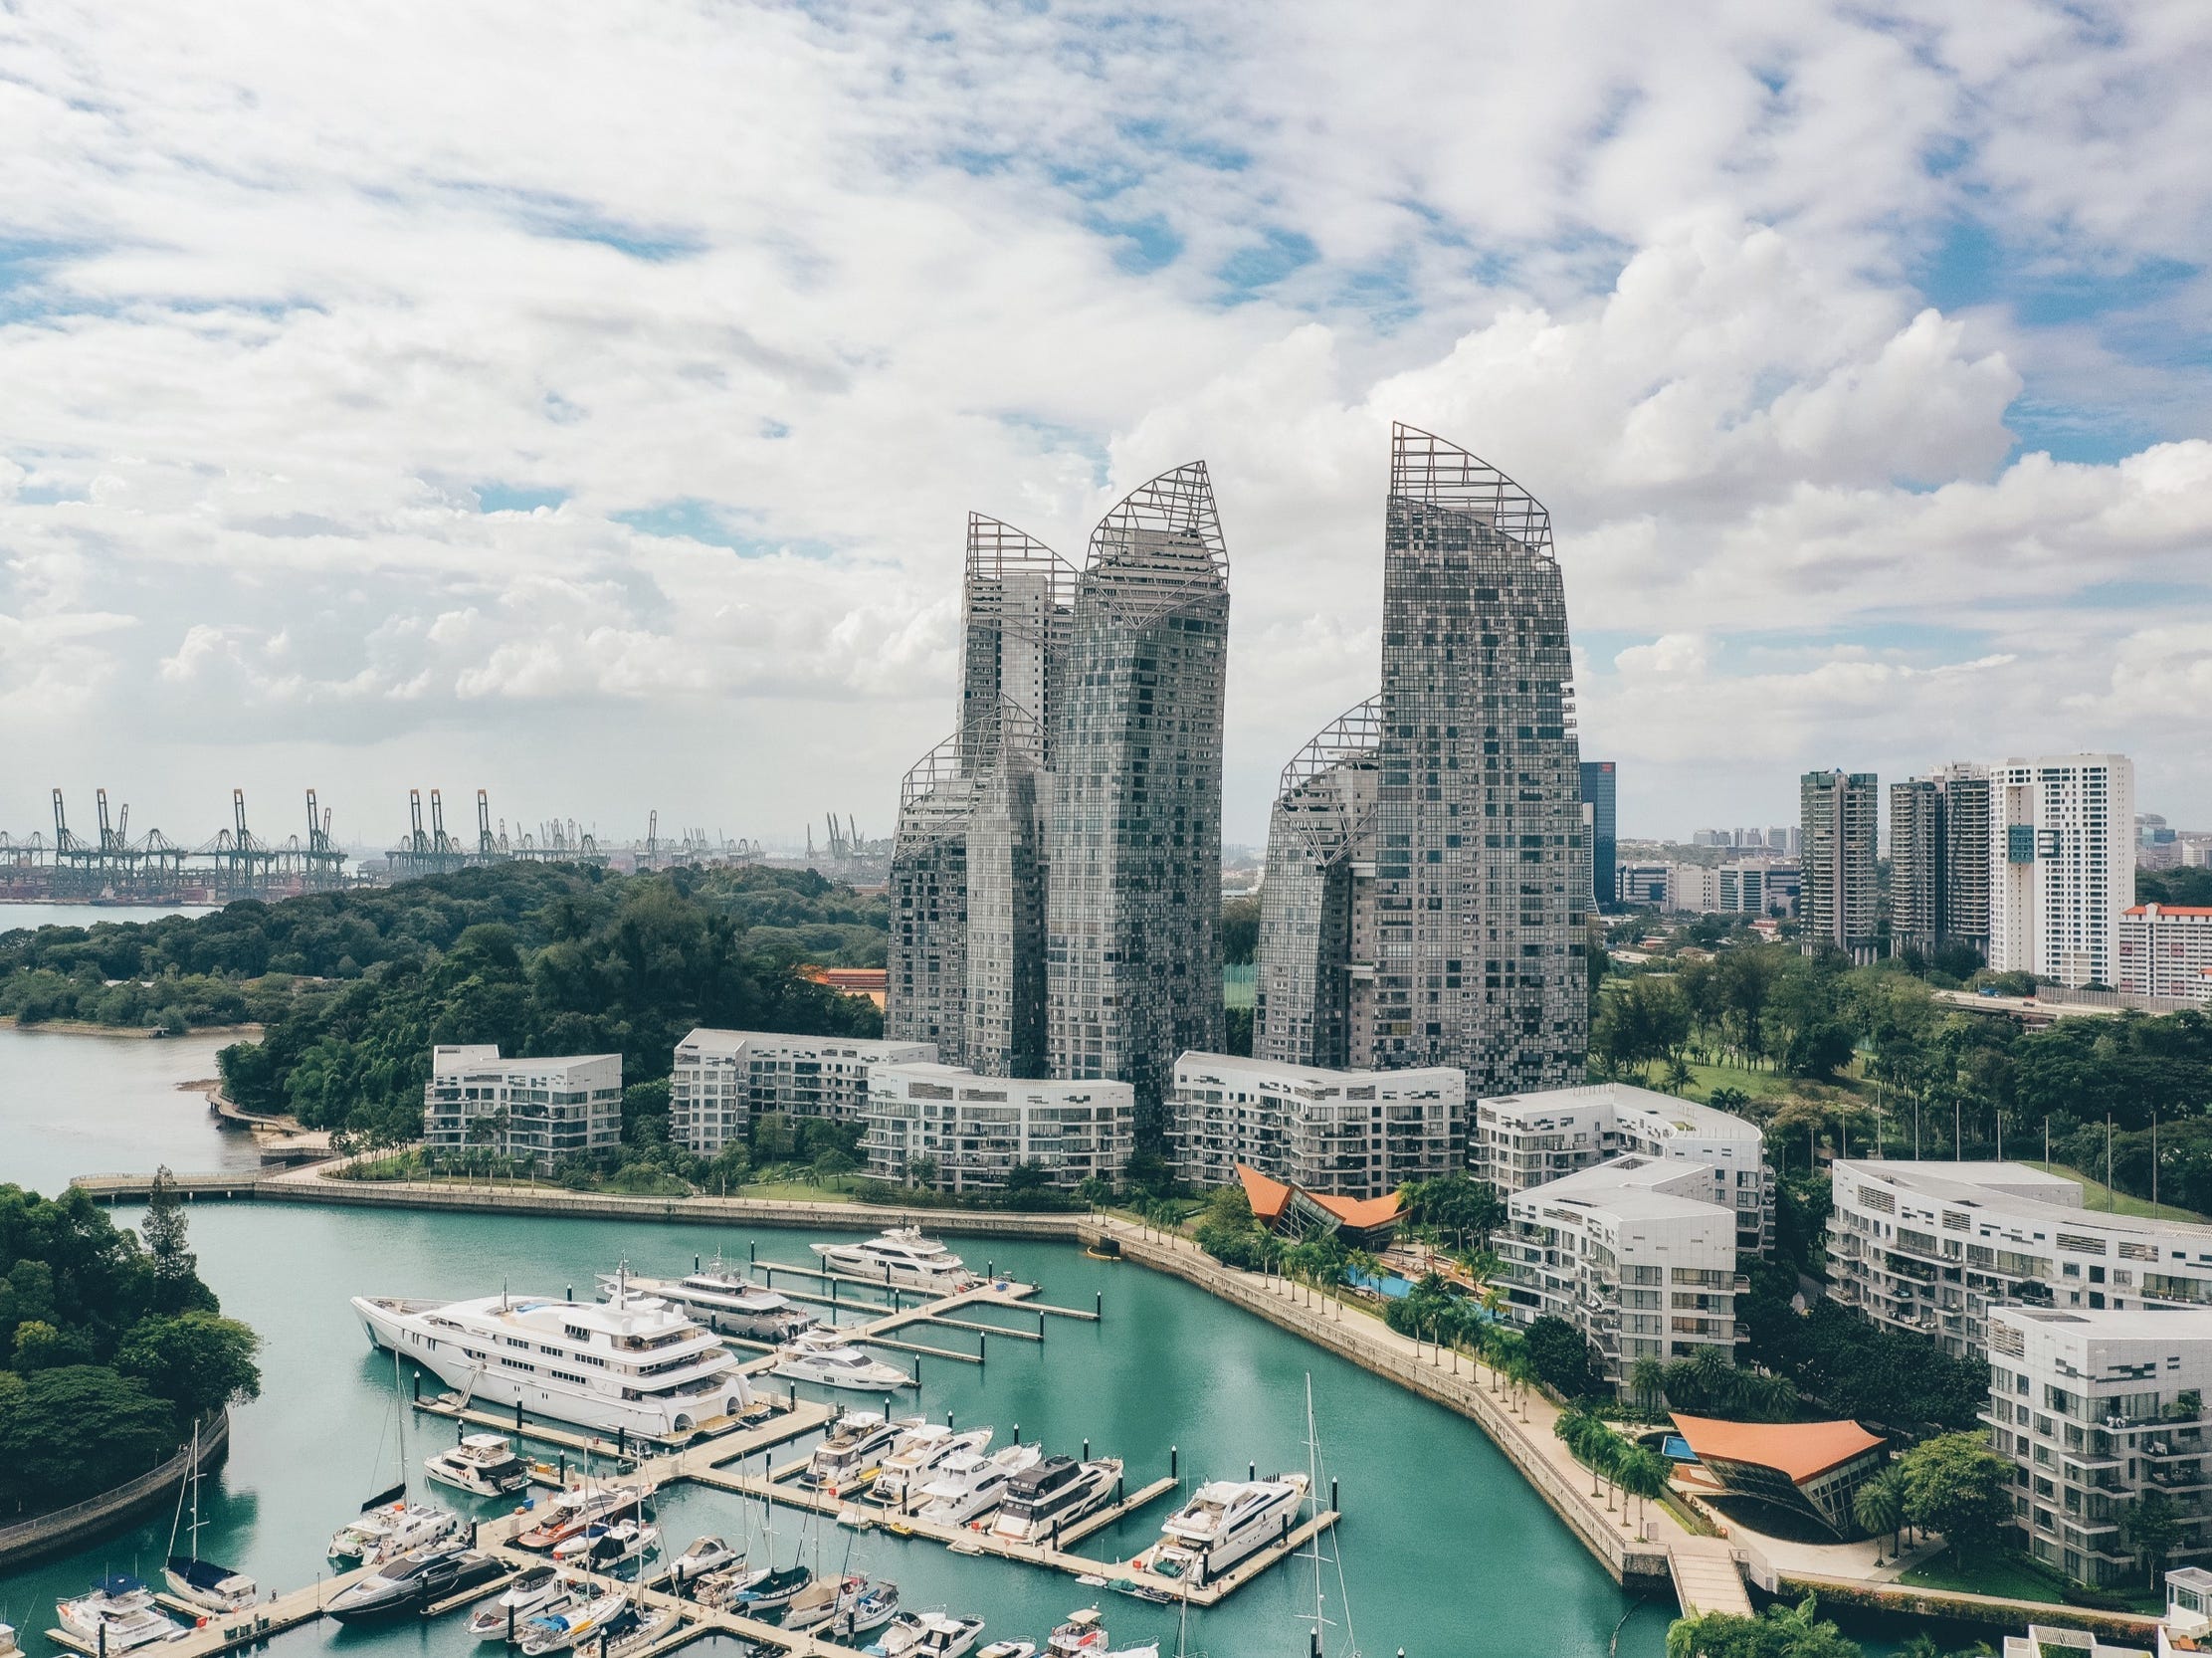 a view of luxury condominiums along the water with boats in foreground in singapore